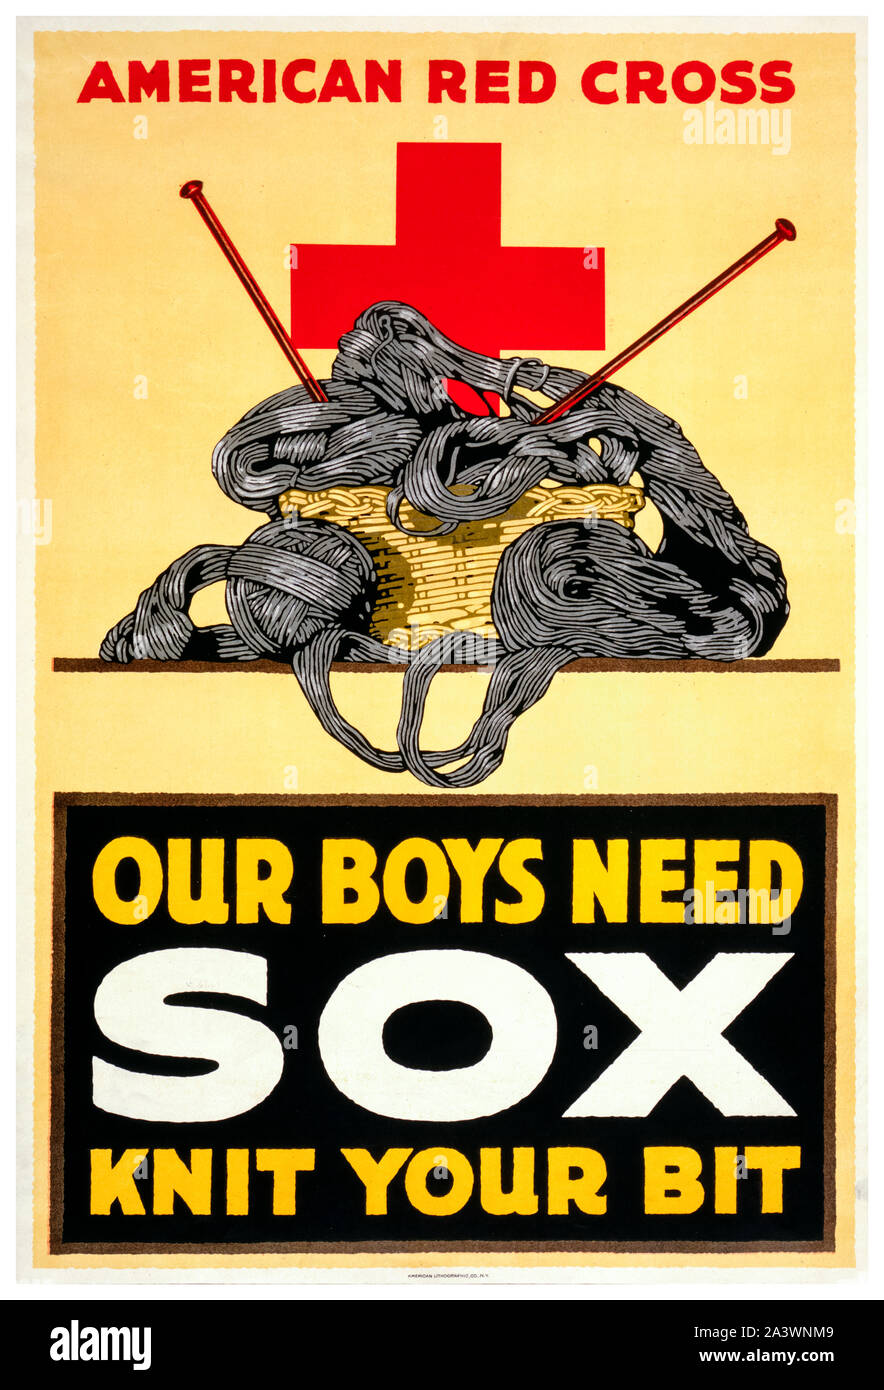 American, US, WW1, War work poster, American Red Cross, Our boys need sox (socks), knit your bit, (knitting basket and wool), 1910-1920 Stock Photo